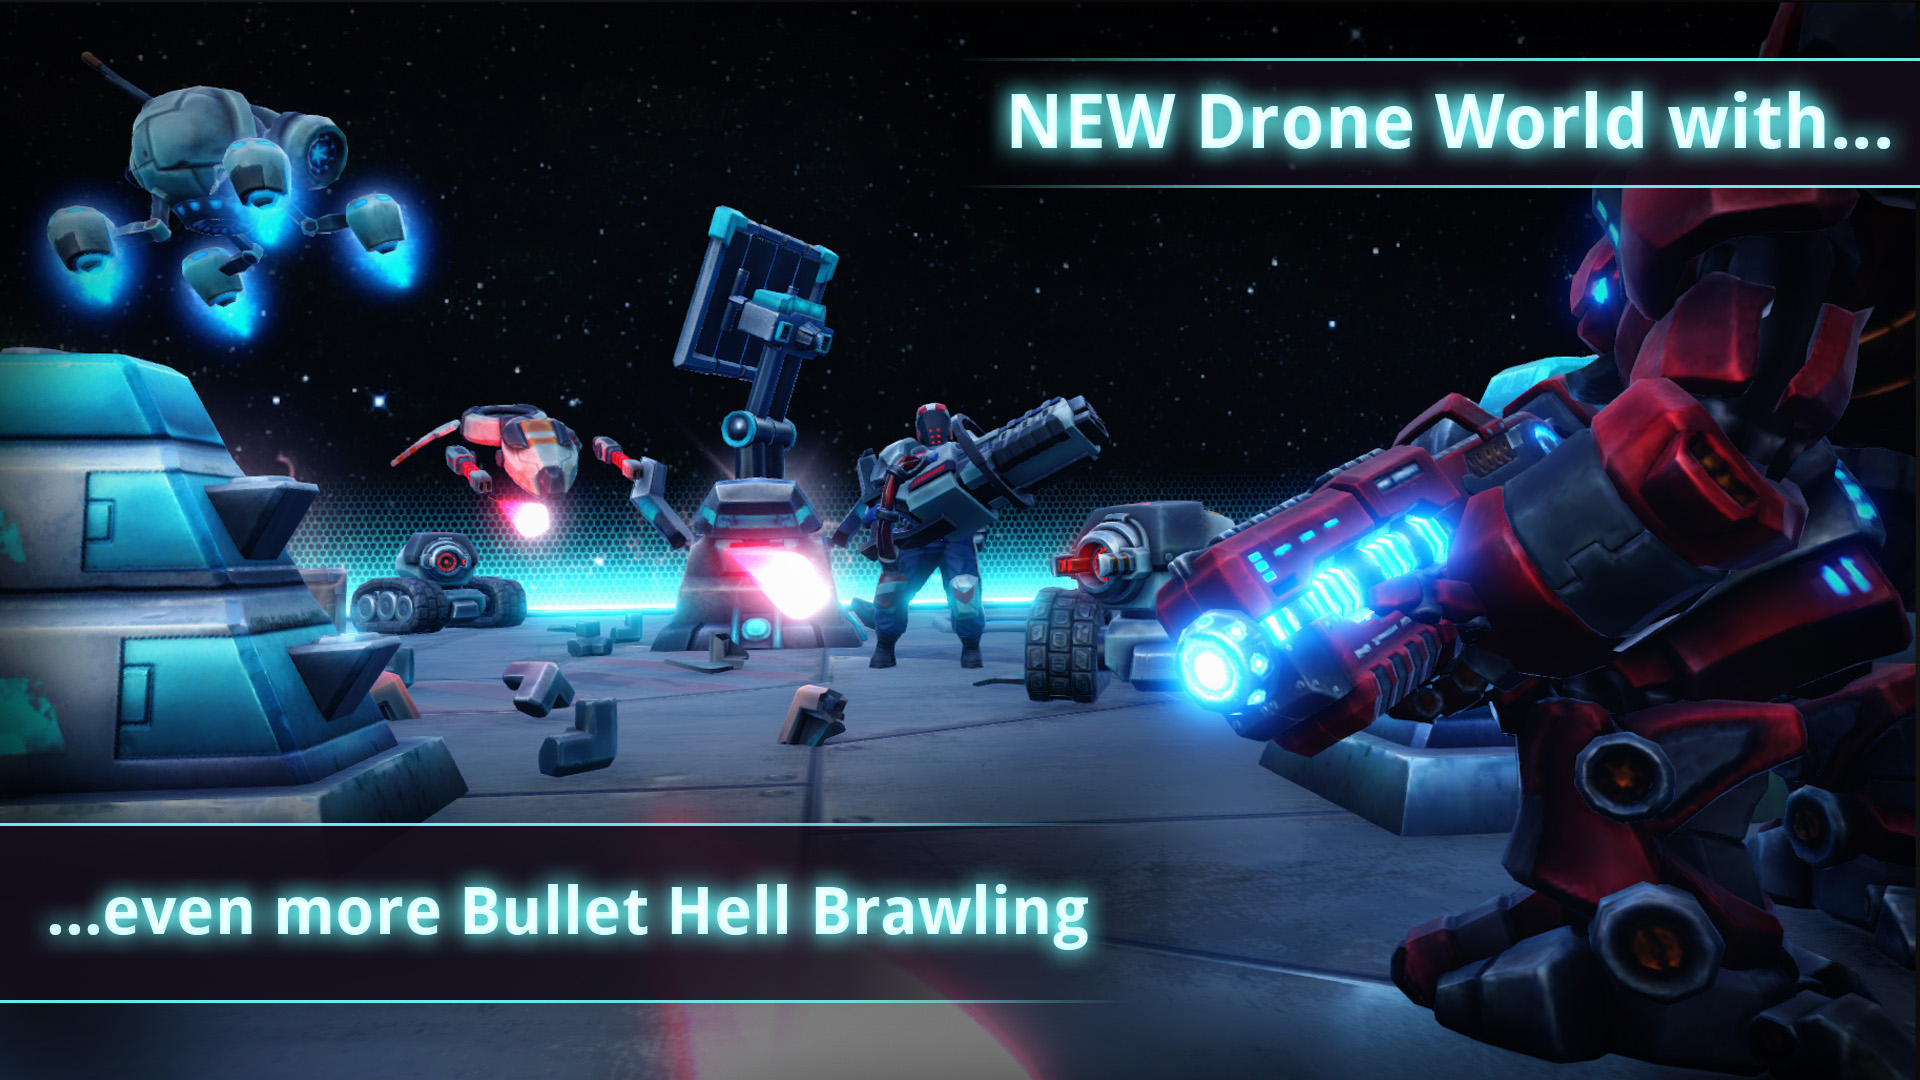 FORCED SHOWDOWN Drone Invasion Download For Free